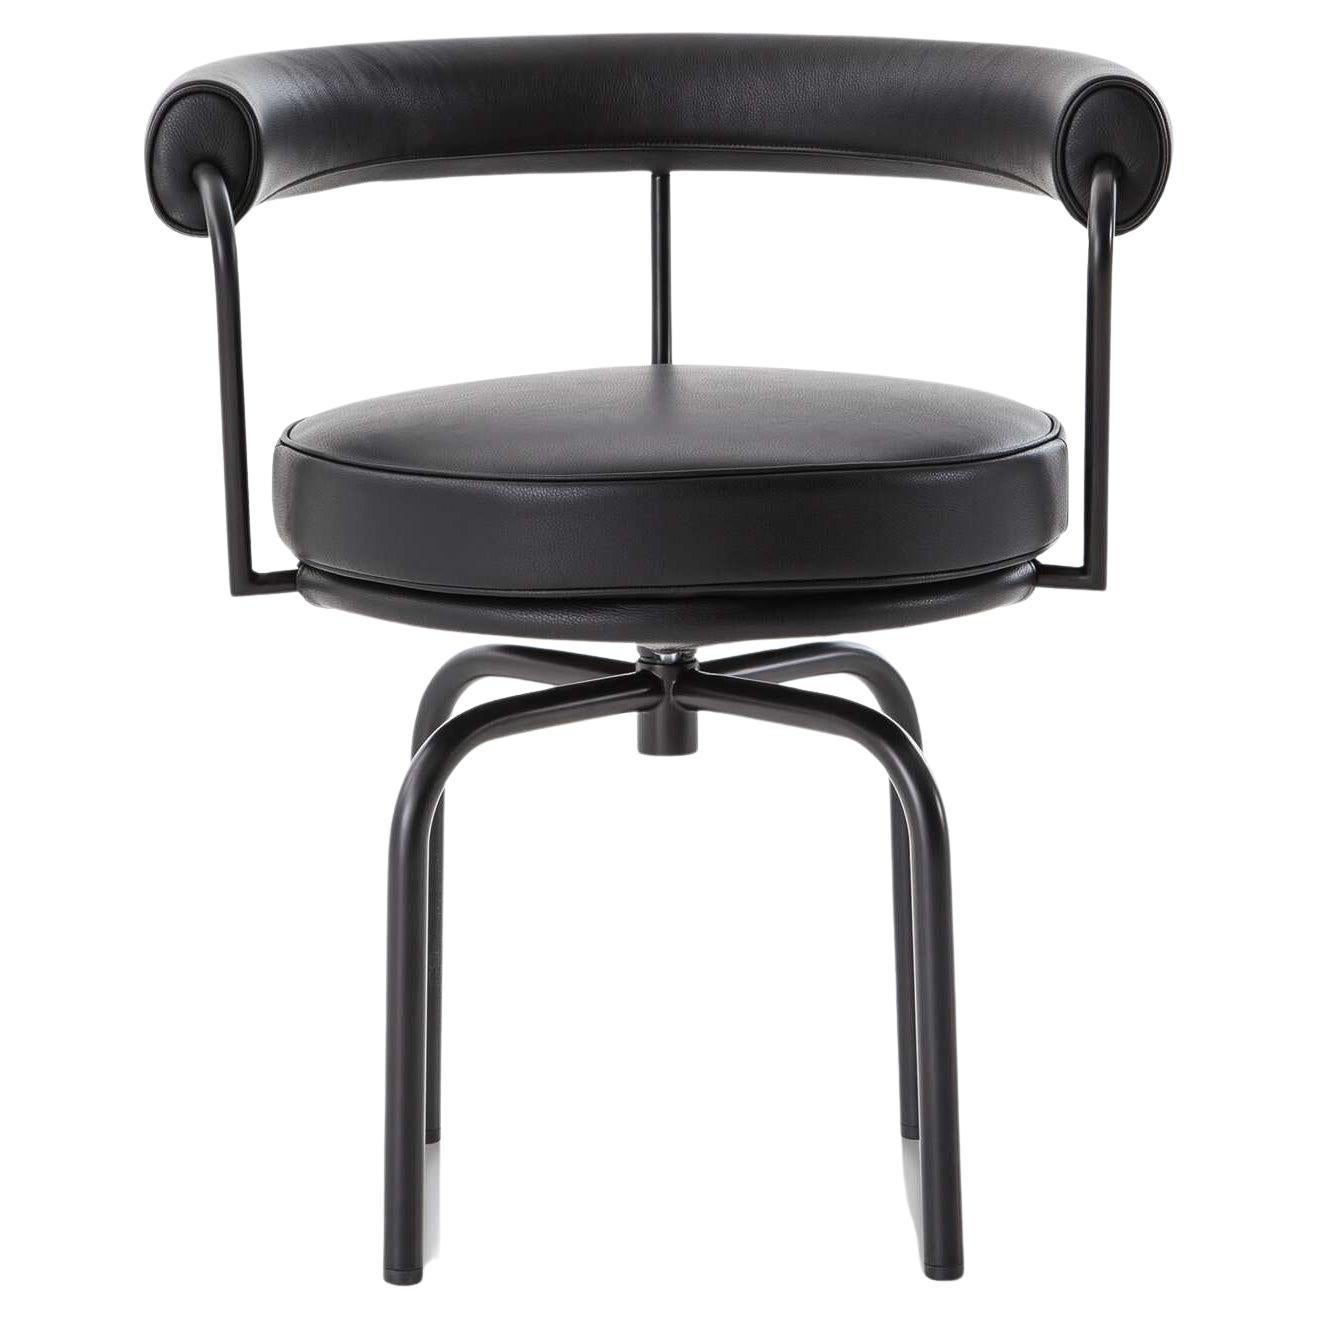 Leather upholstered LC7 chair designed by Charlotte Perriand in 1927. Relaunched in 1978.
Manufactured by Cassina in Italy.

Designed by Charlotte Perriand and part of the LC collection by Le Corbusier, Pierre Jeanneret and Charlotte